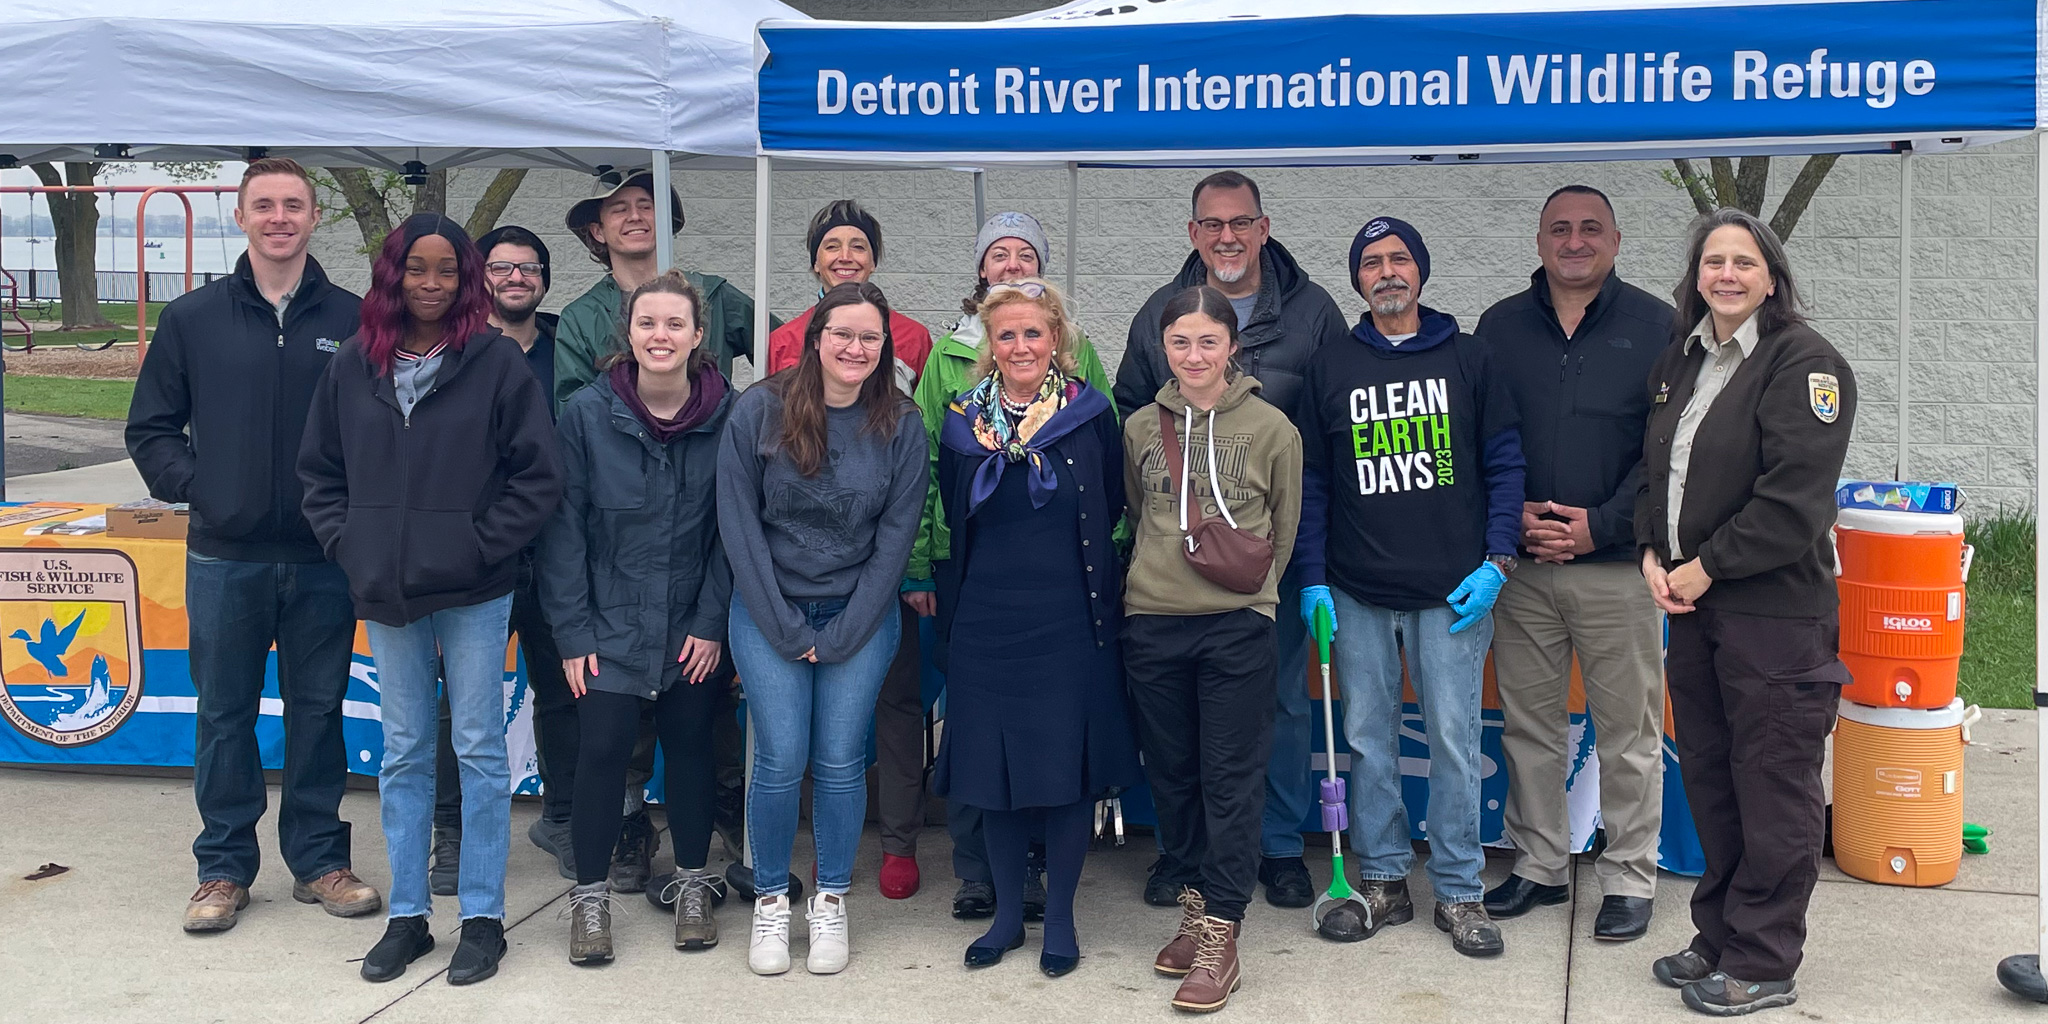 Rep. Dingell with clean up volunteers at John D Dingell Park